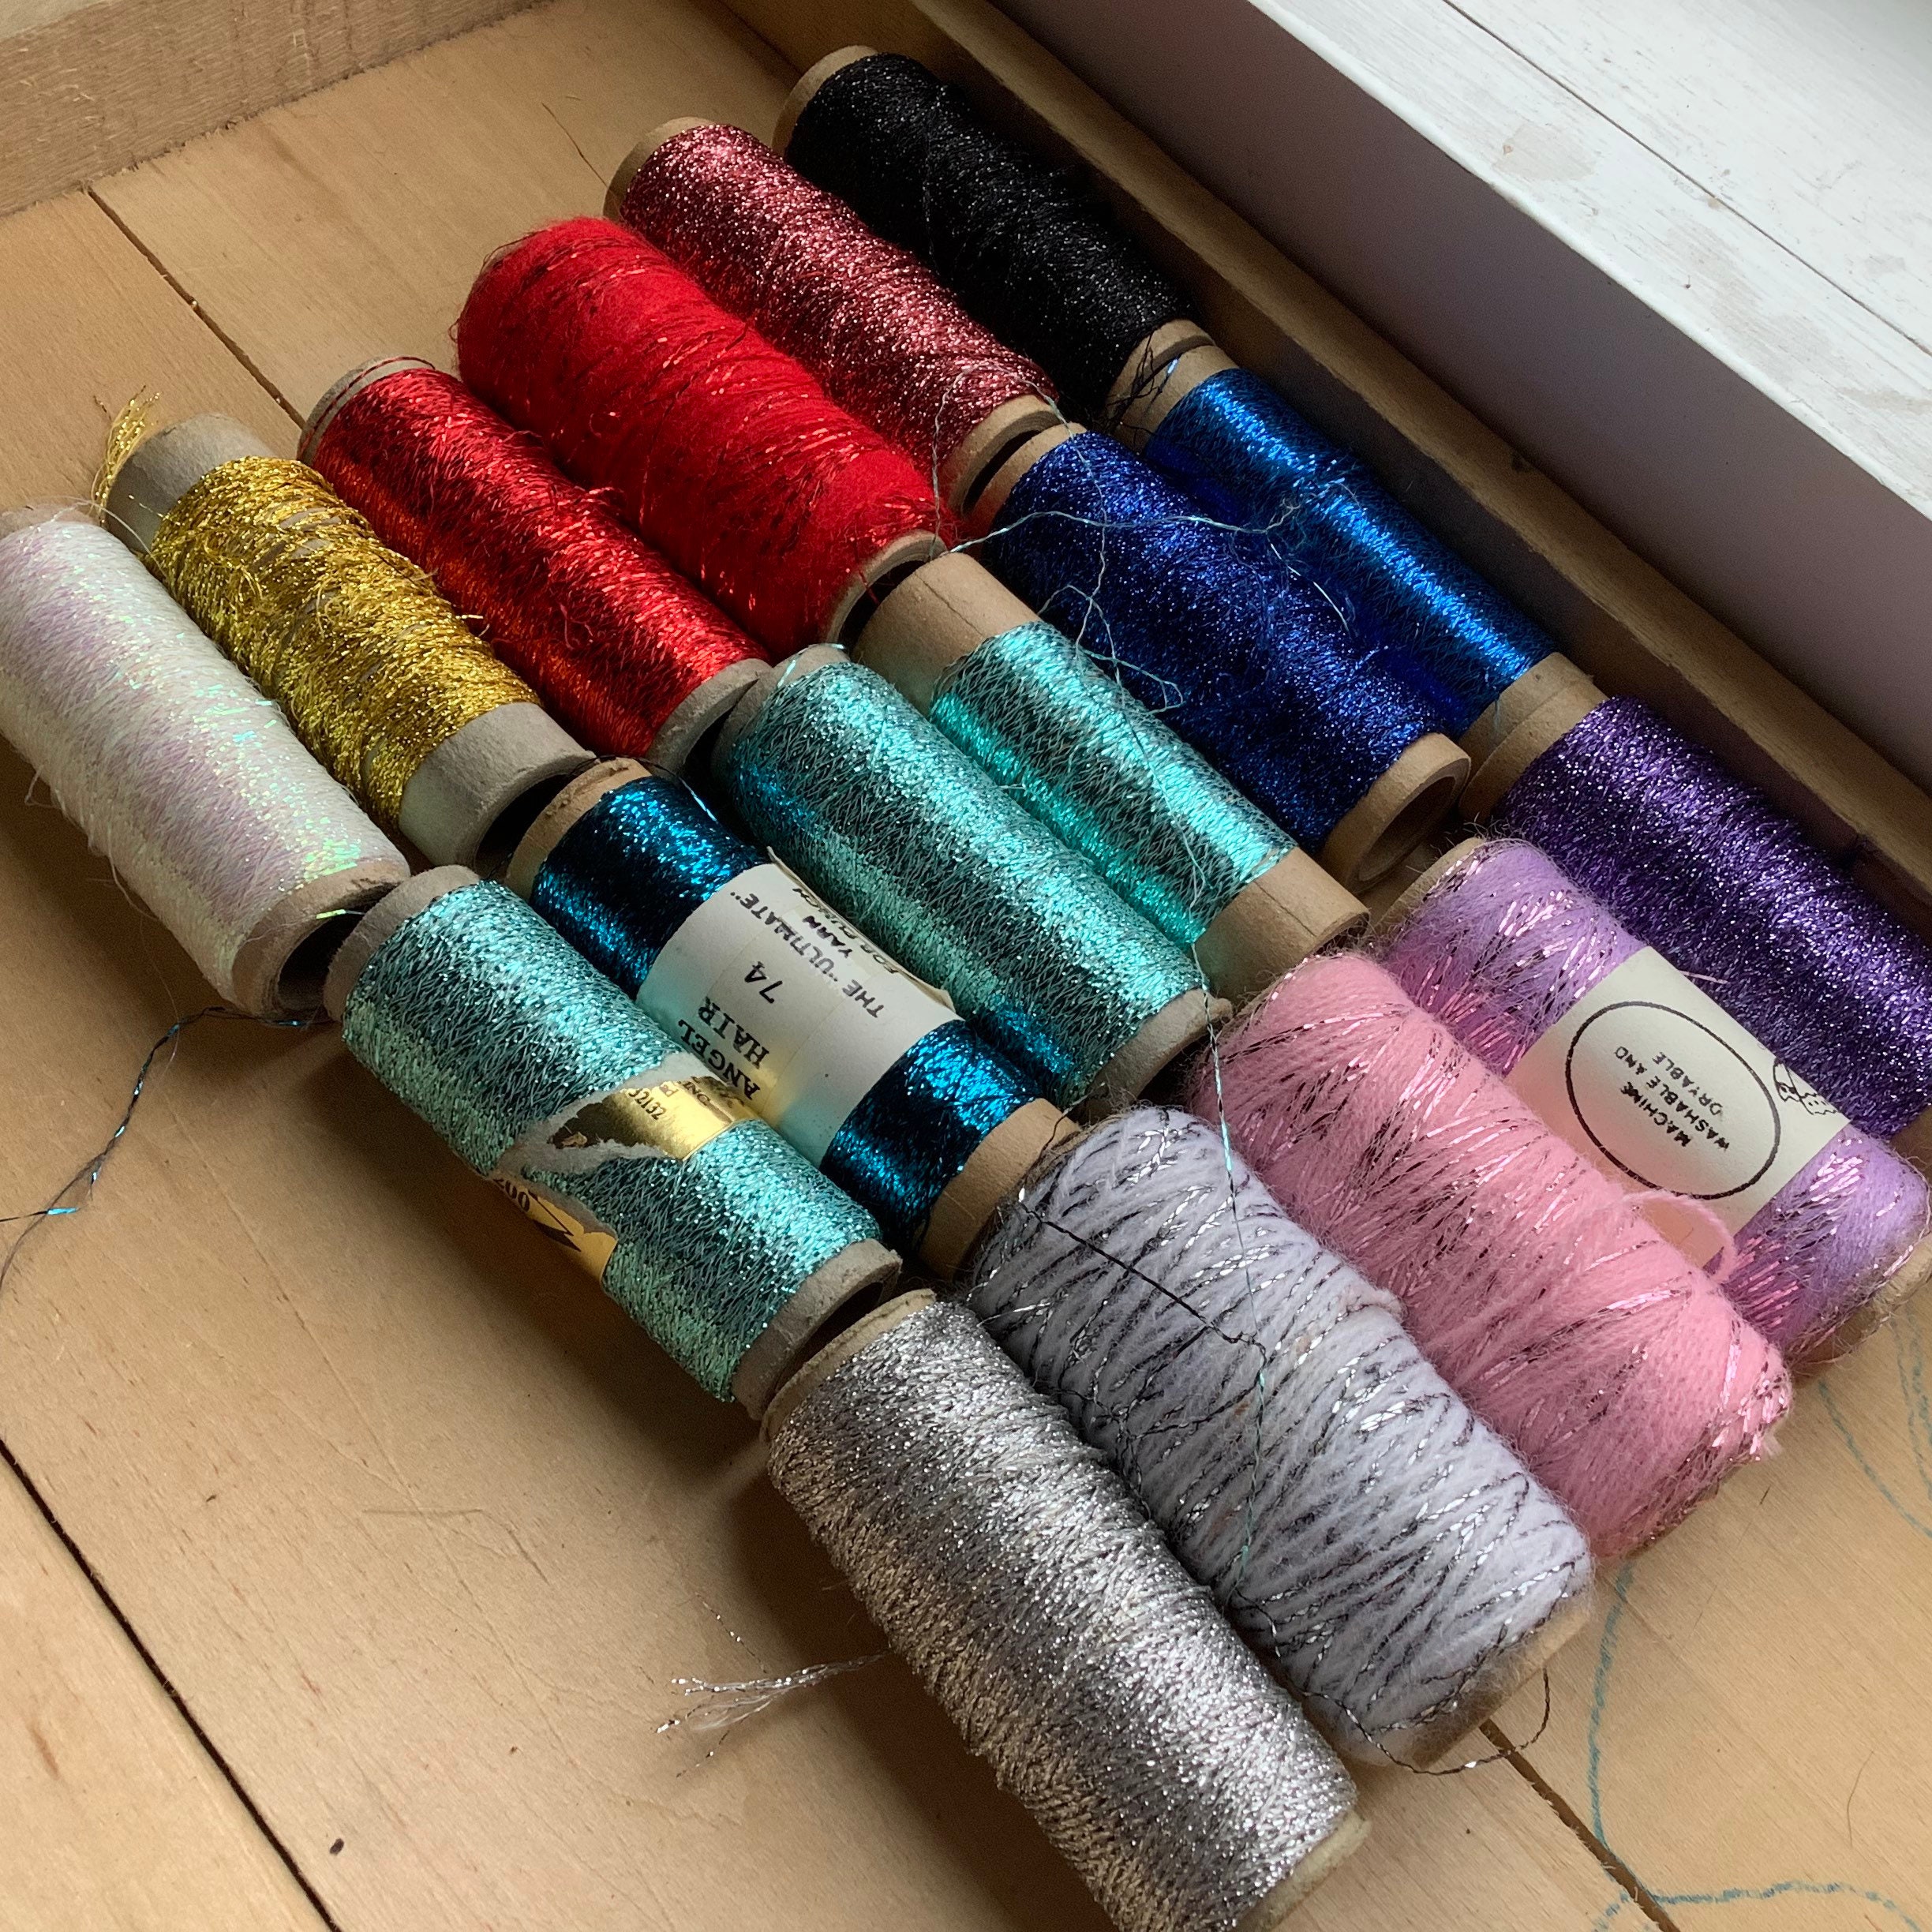 8 Spools Of Punch Needle Thread Craft Embroidery Yarn